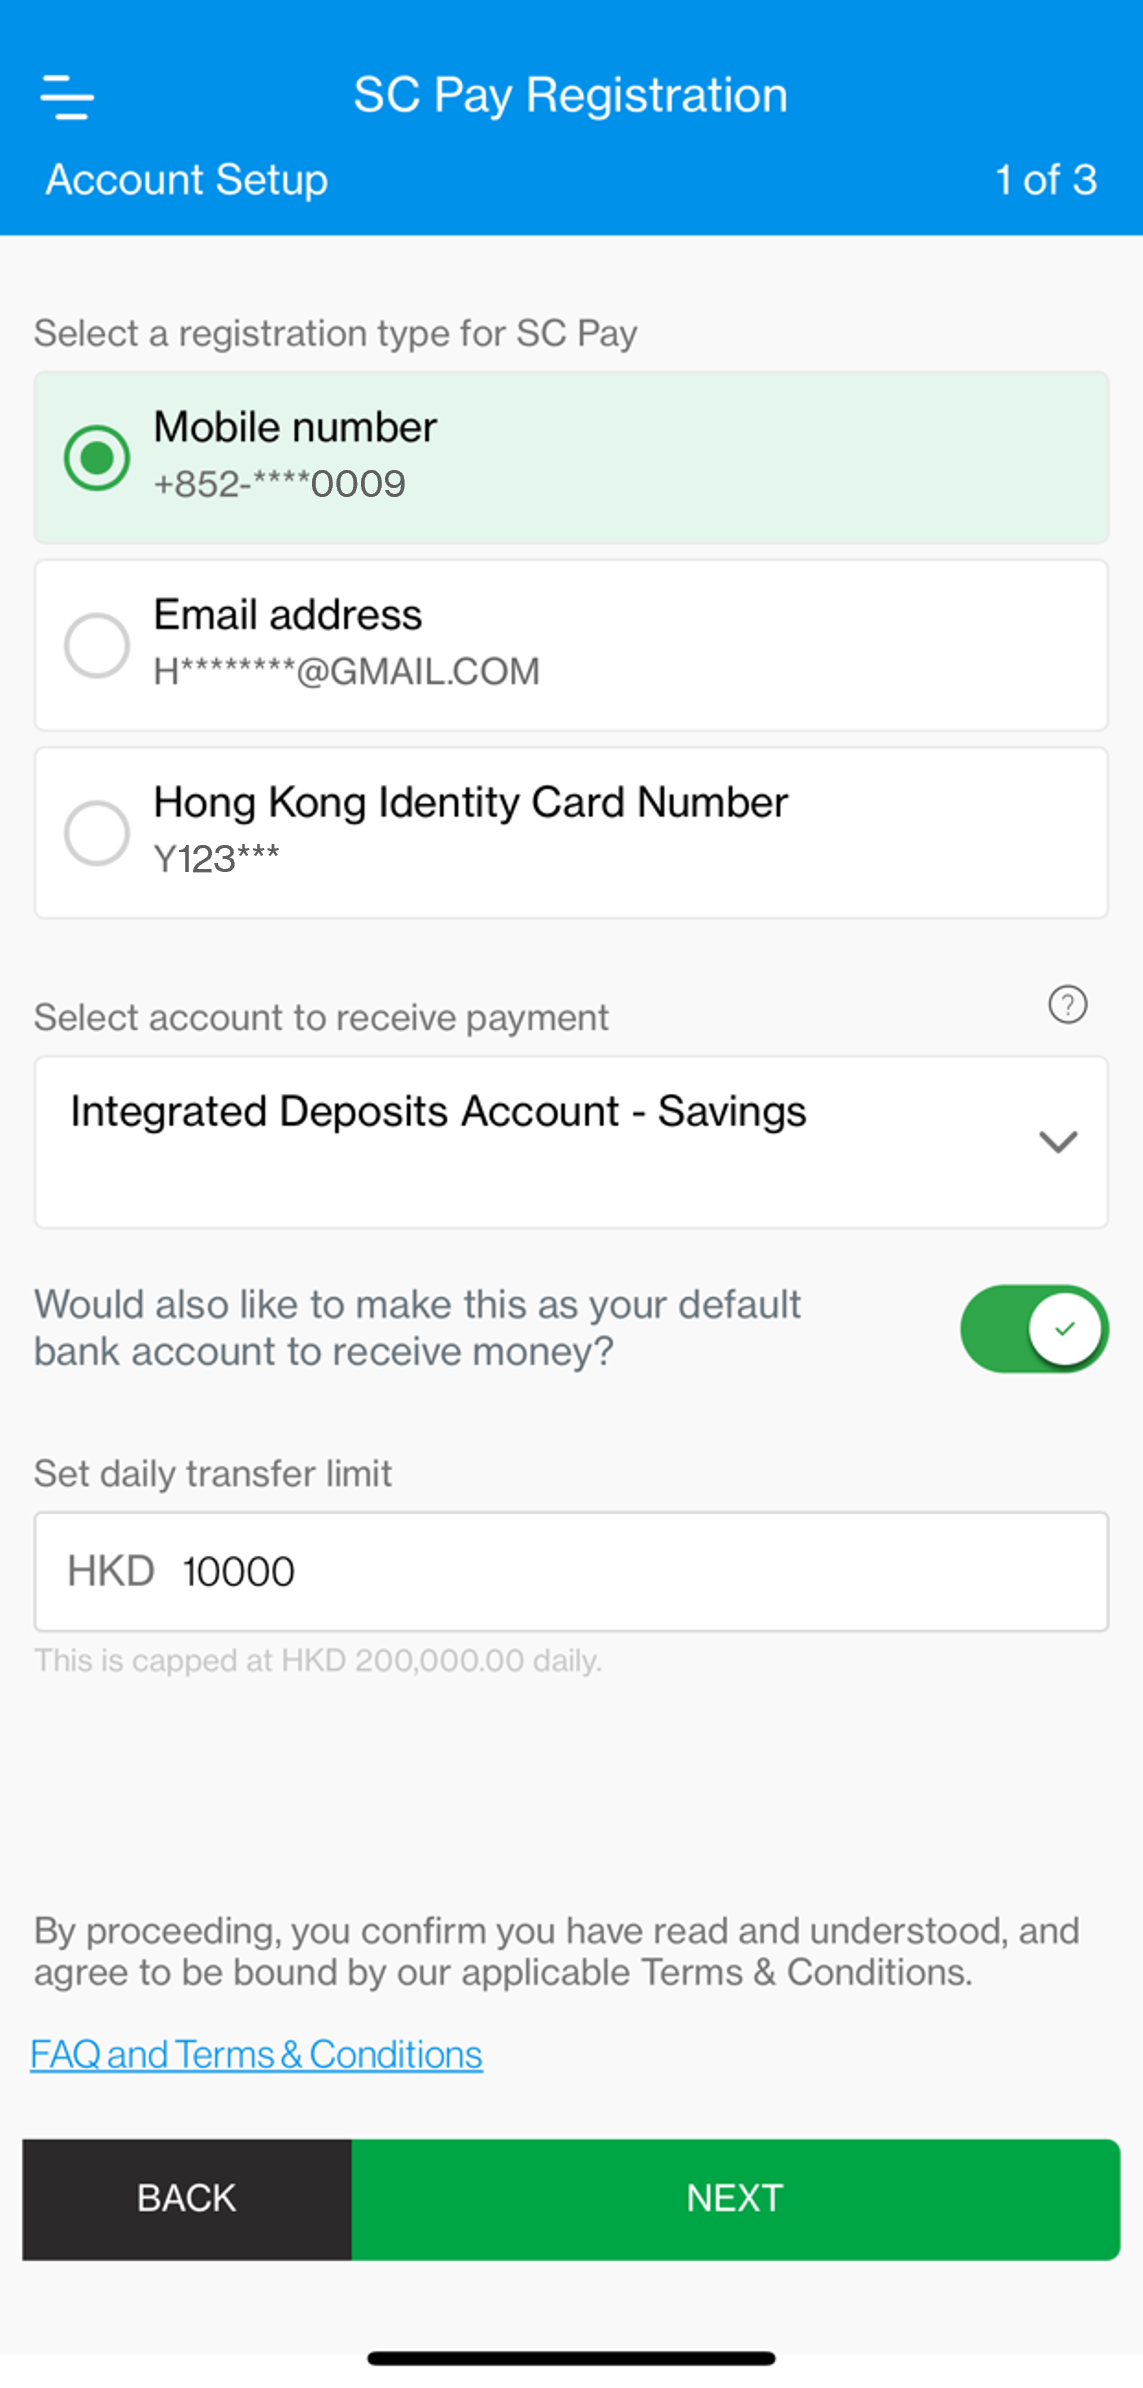 Select mobile number or email address to register with, then source account to send money from. Set the account as default to receive money via FPS. You can also change the pre-set daily transfer limit (maximum HK$200,000).